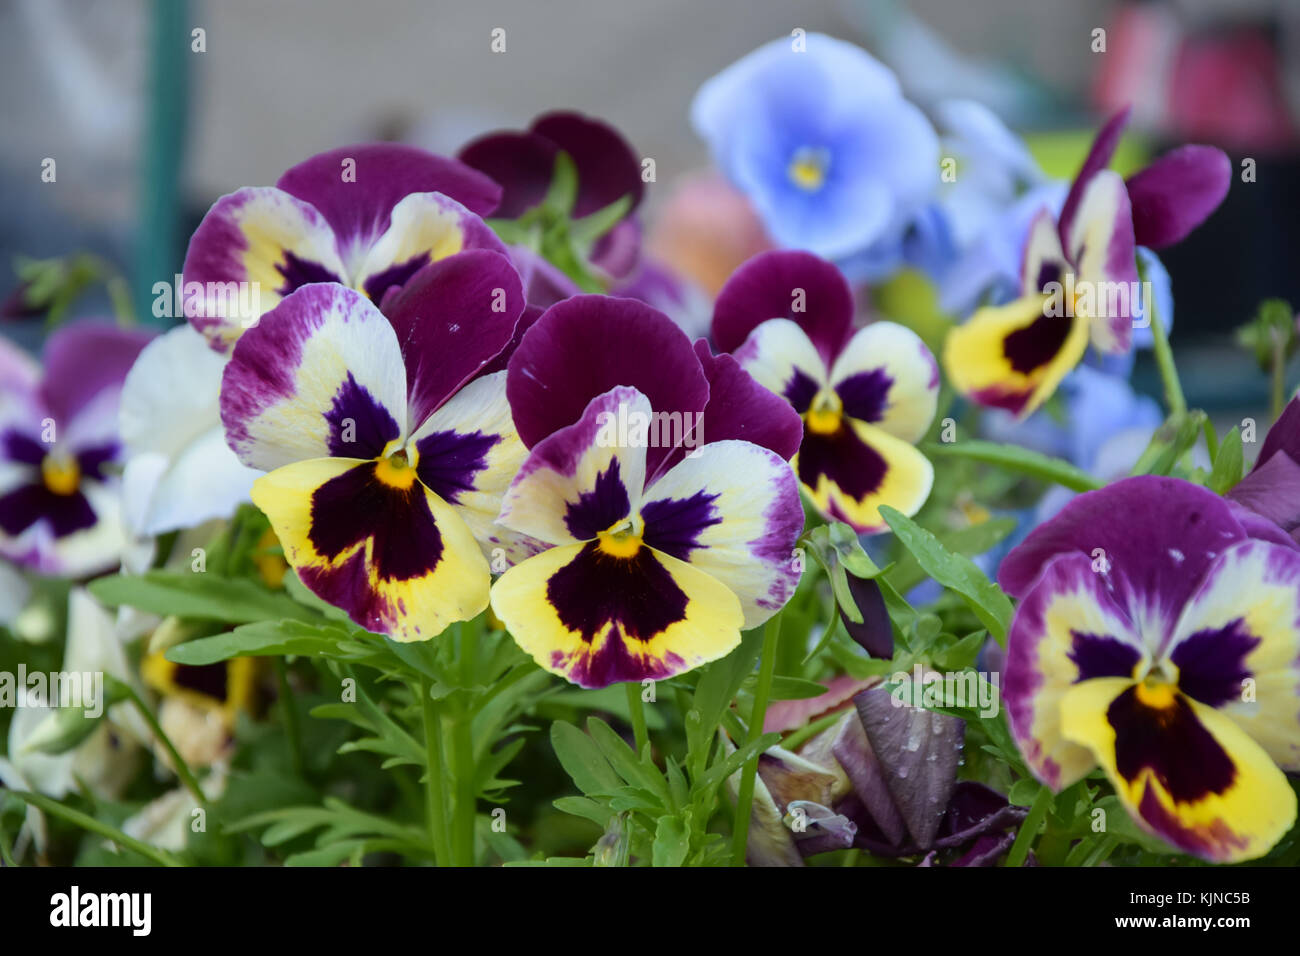 Colorful pansy flowers blooming in the garden Stock Photo